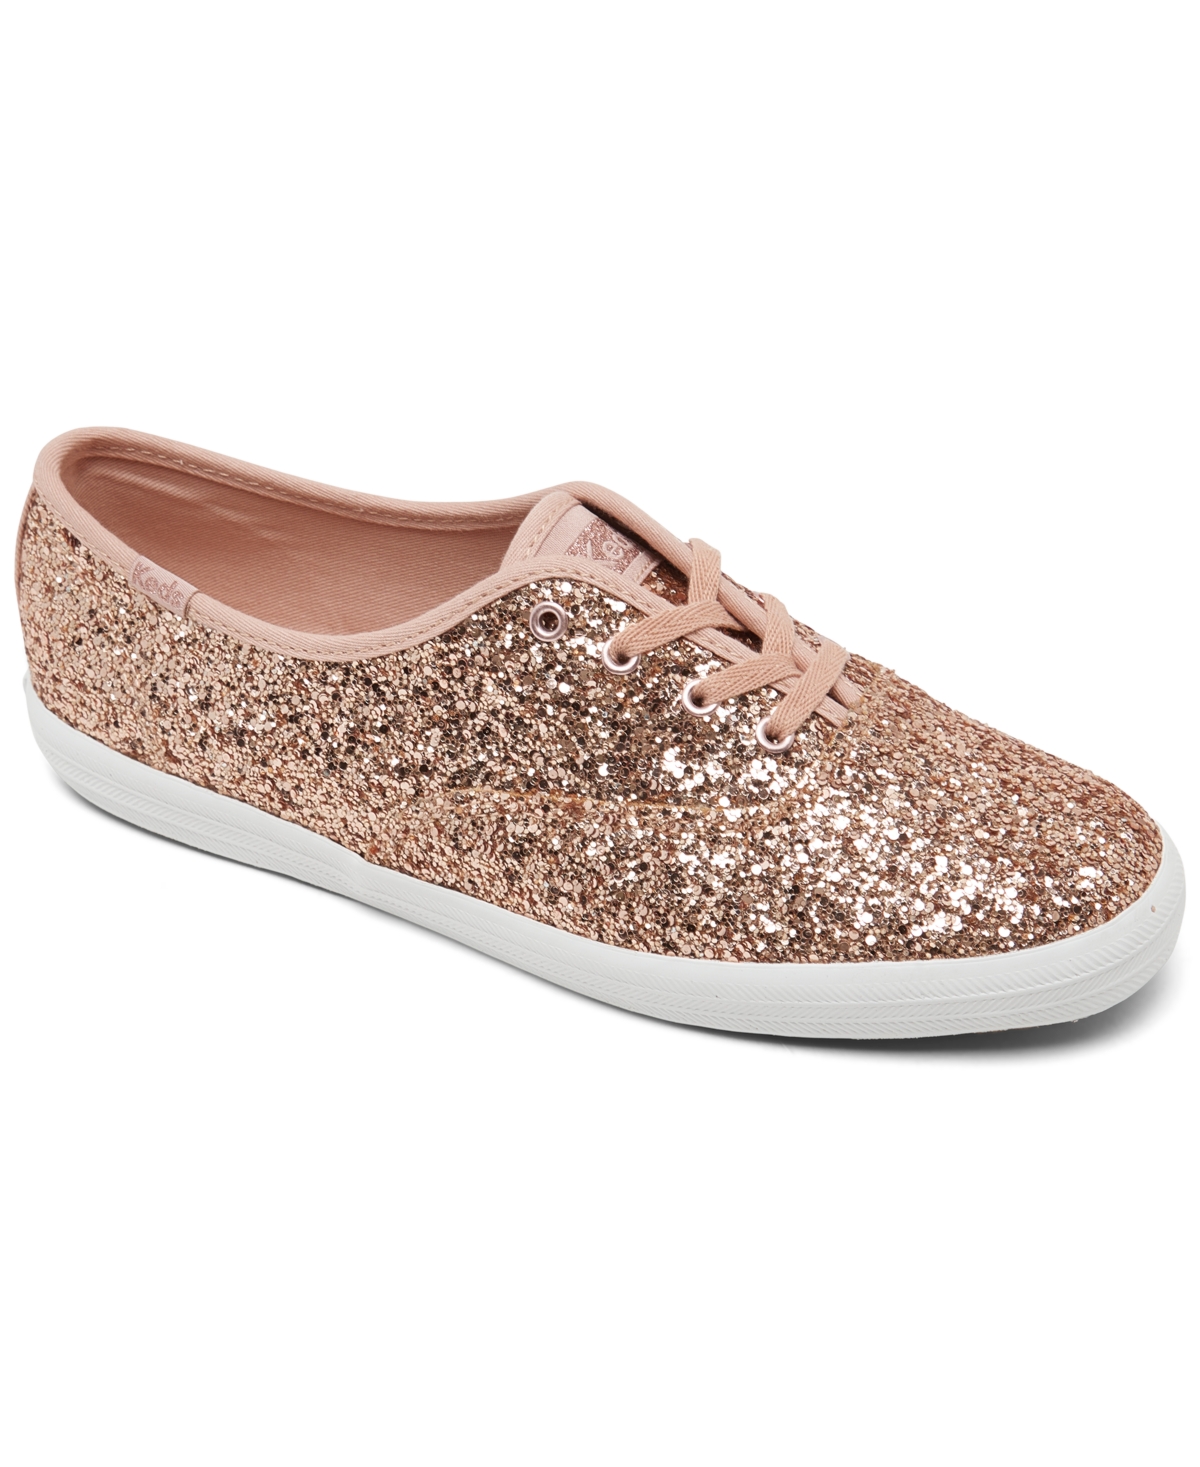 Keds Champion Glitter Celebrations Sneakers In Rose Gold-tone